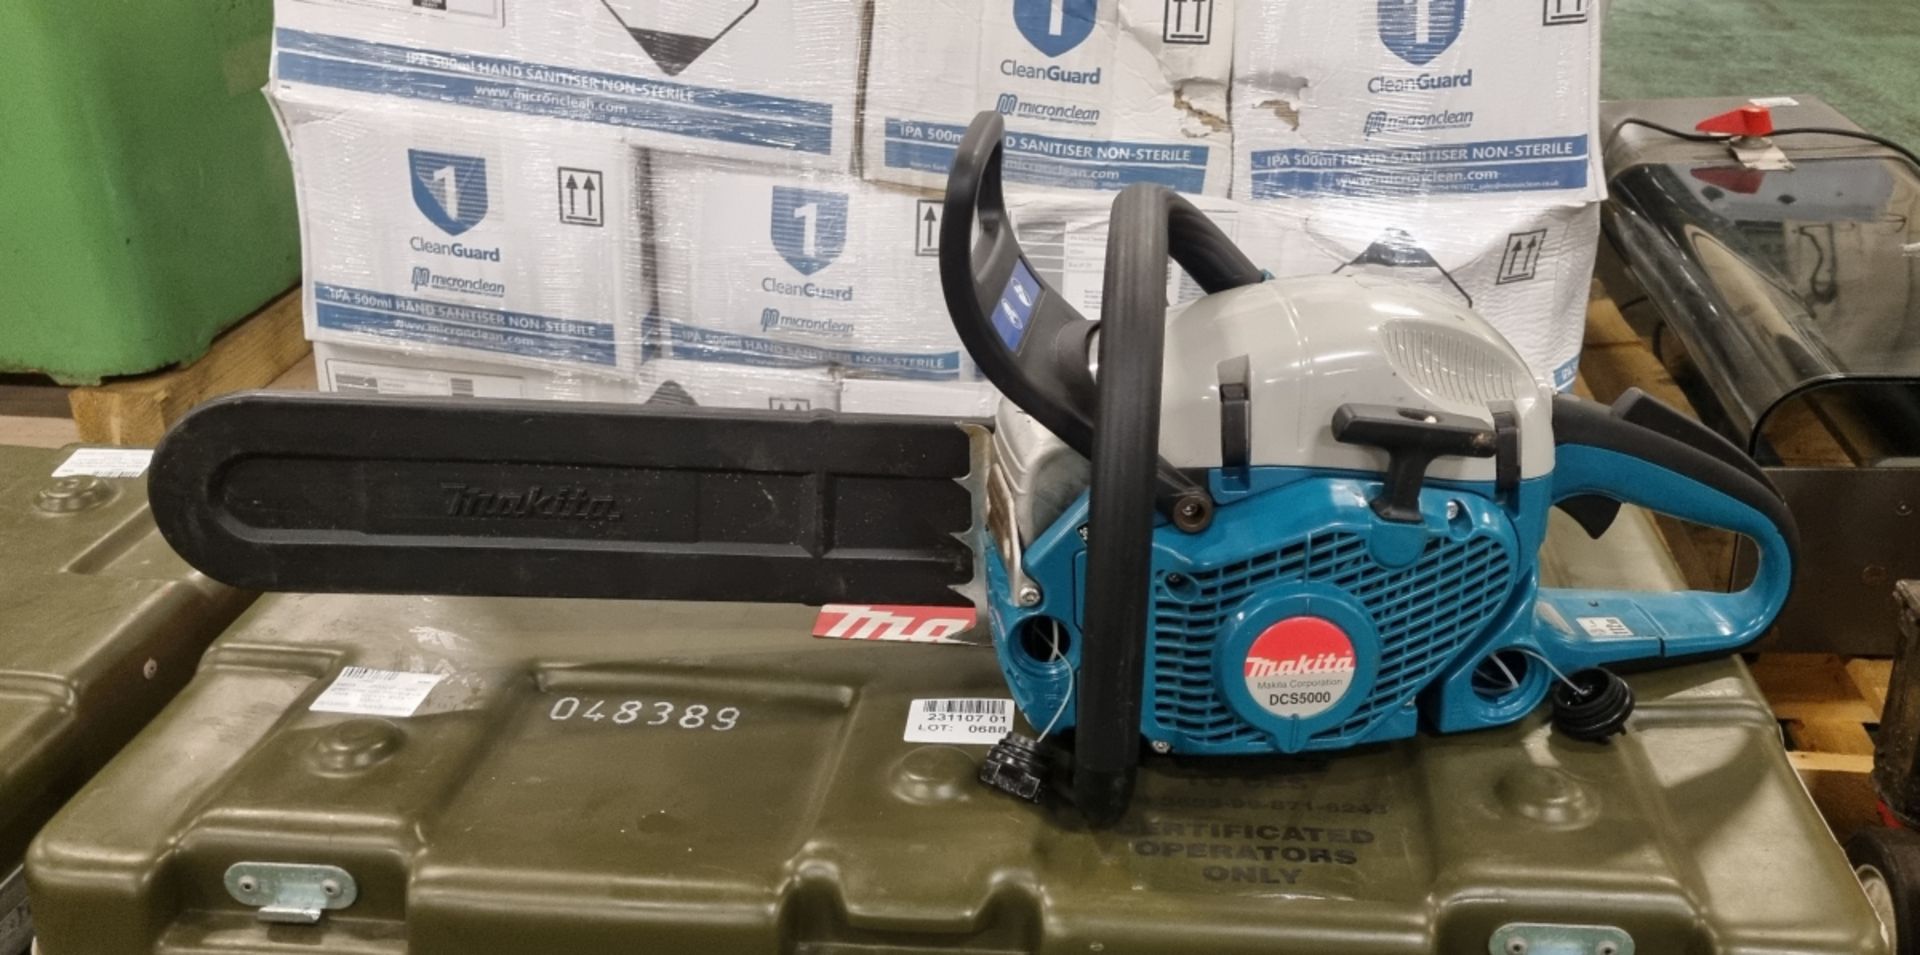 Makita DCS5000 chainsaw in green case with maintenance tools - L 800 x W 450 x H 320mm - Bild 5 aus 8